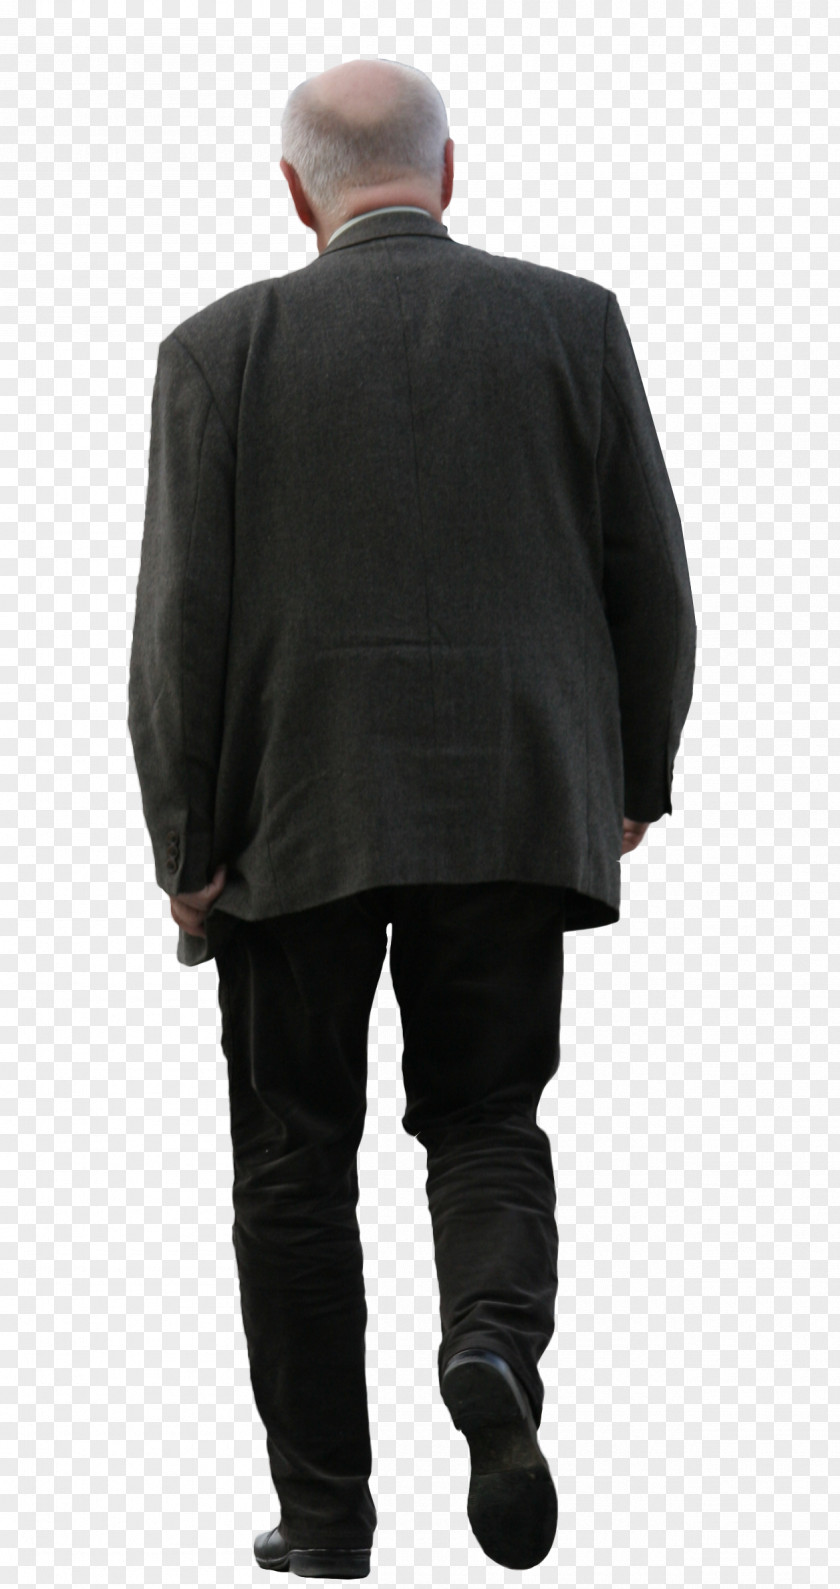 The Old Man Age PNG